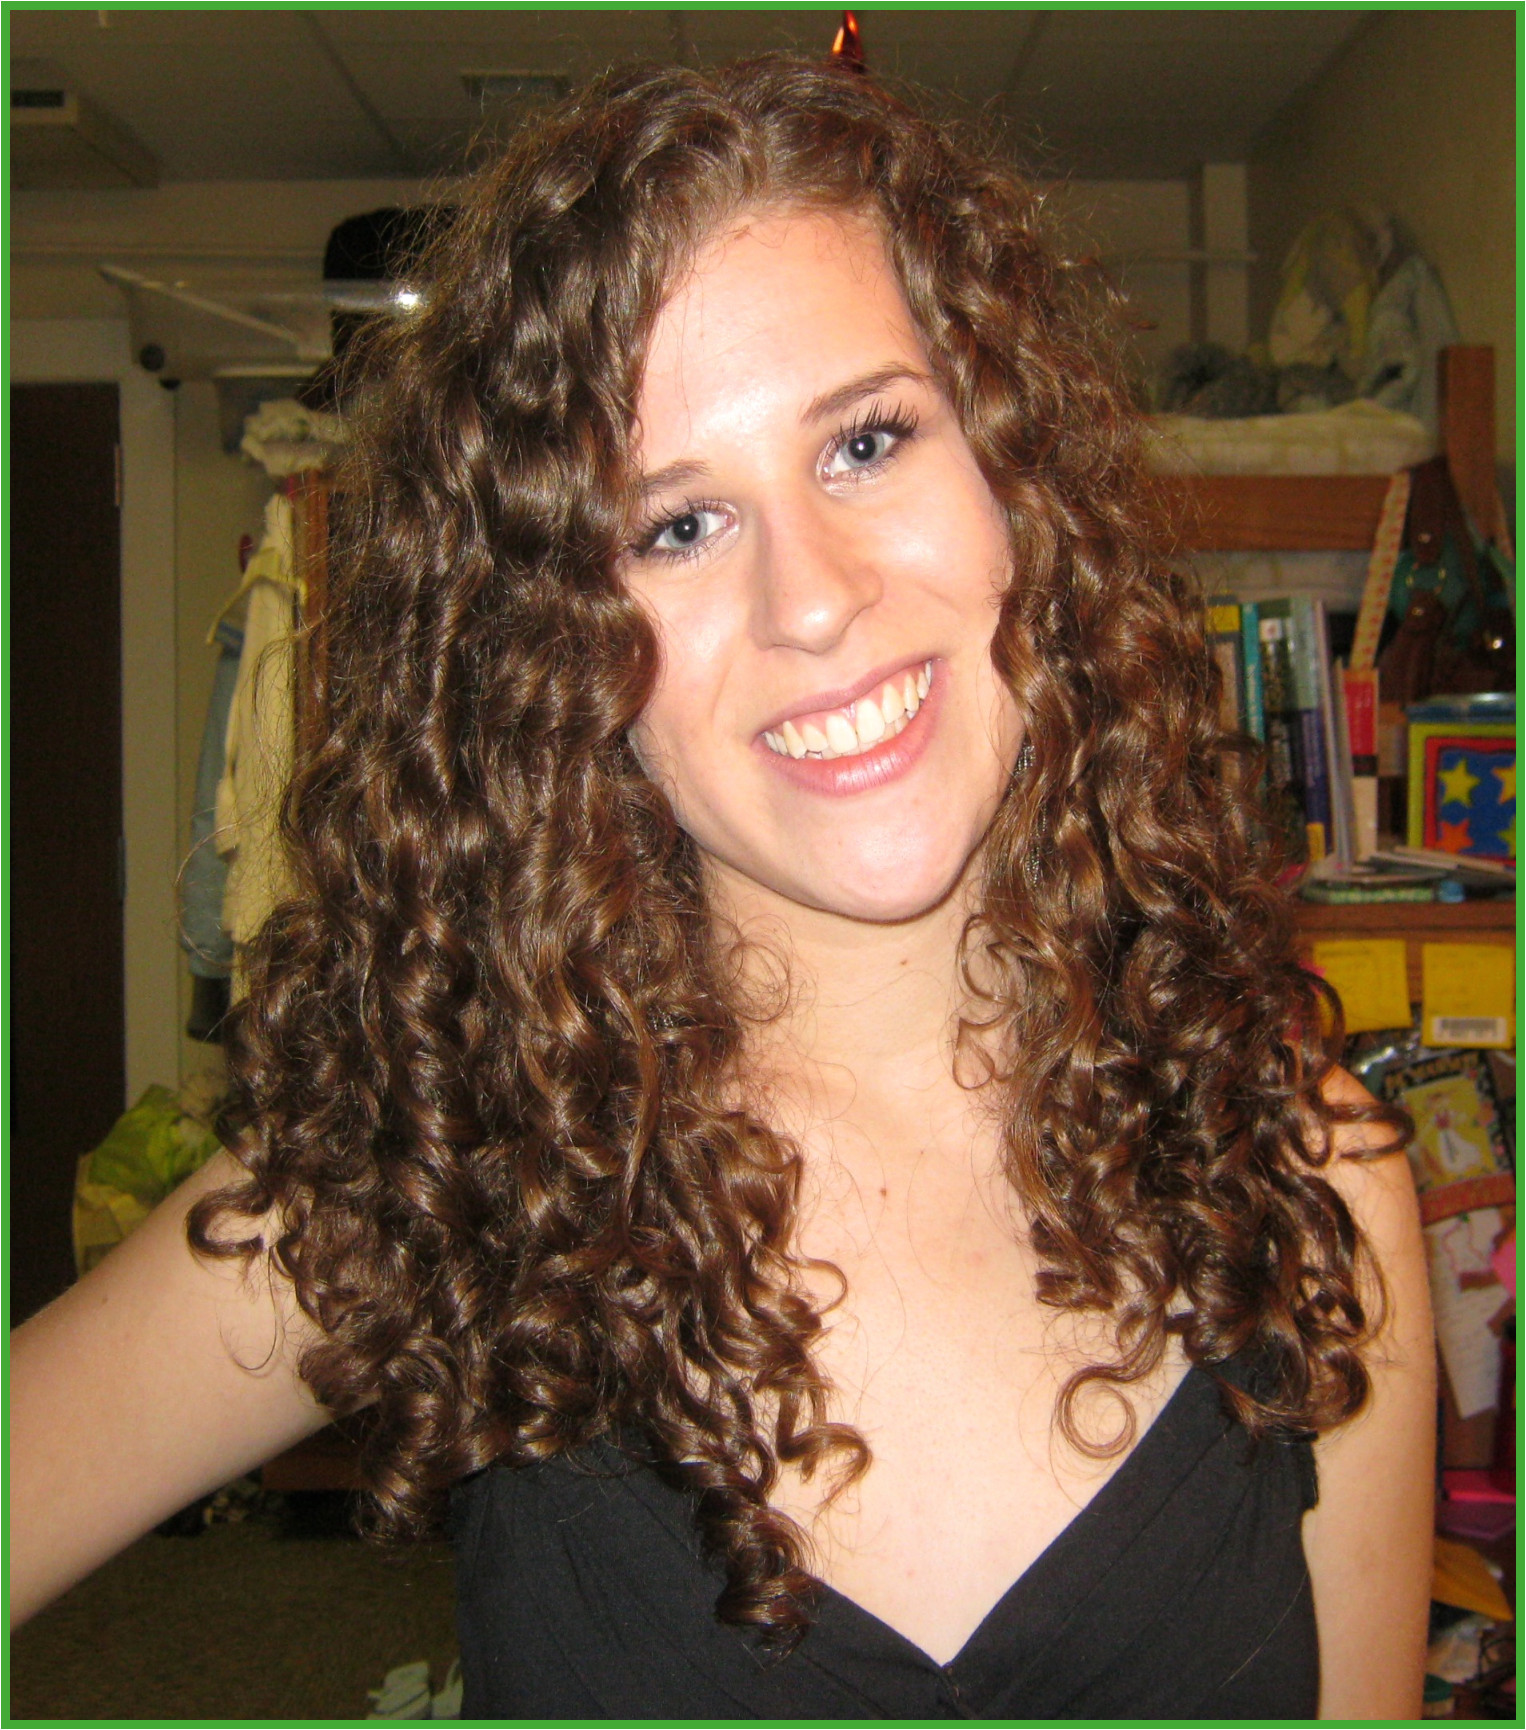 Hairstyles for Curly Hair Small Face Short Wavy Hairstyles for Oval Faces Fresh Exciting Very Curly